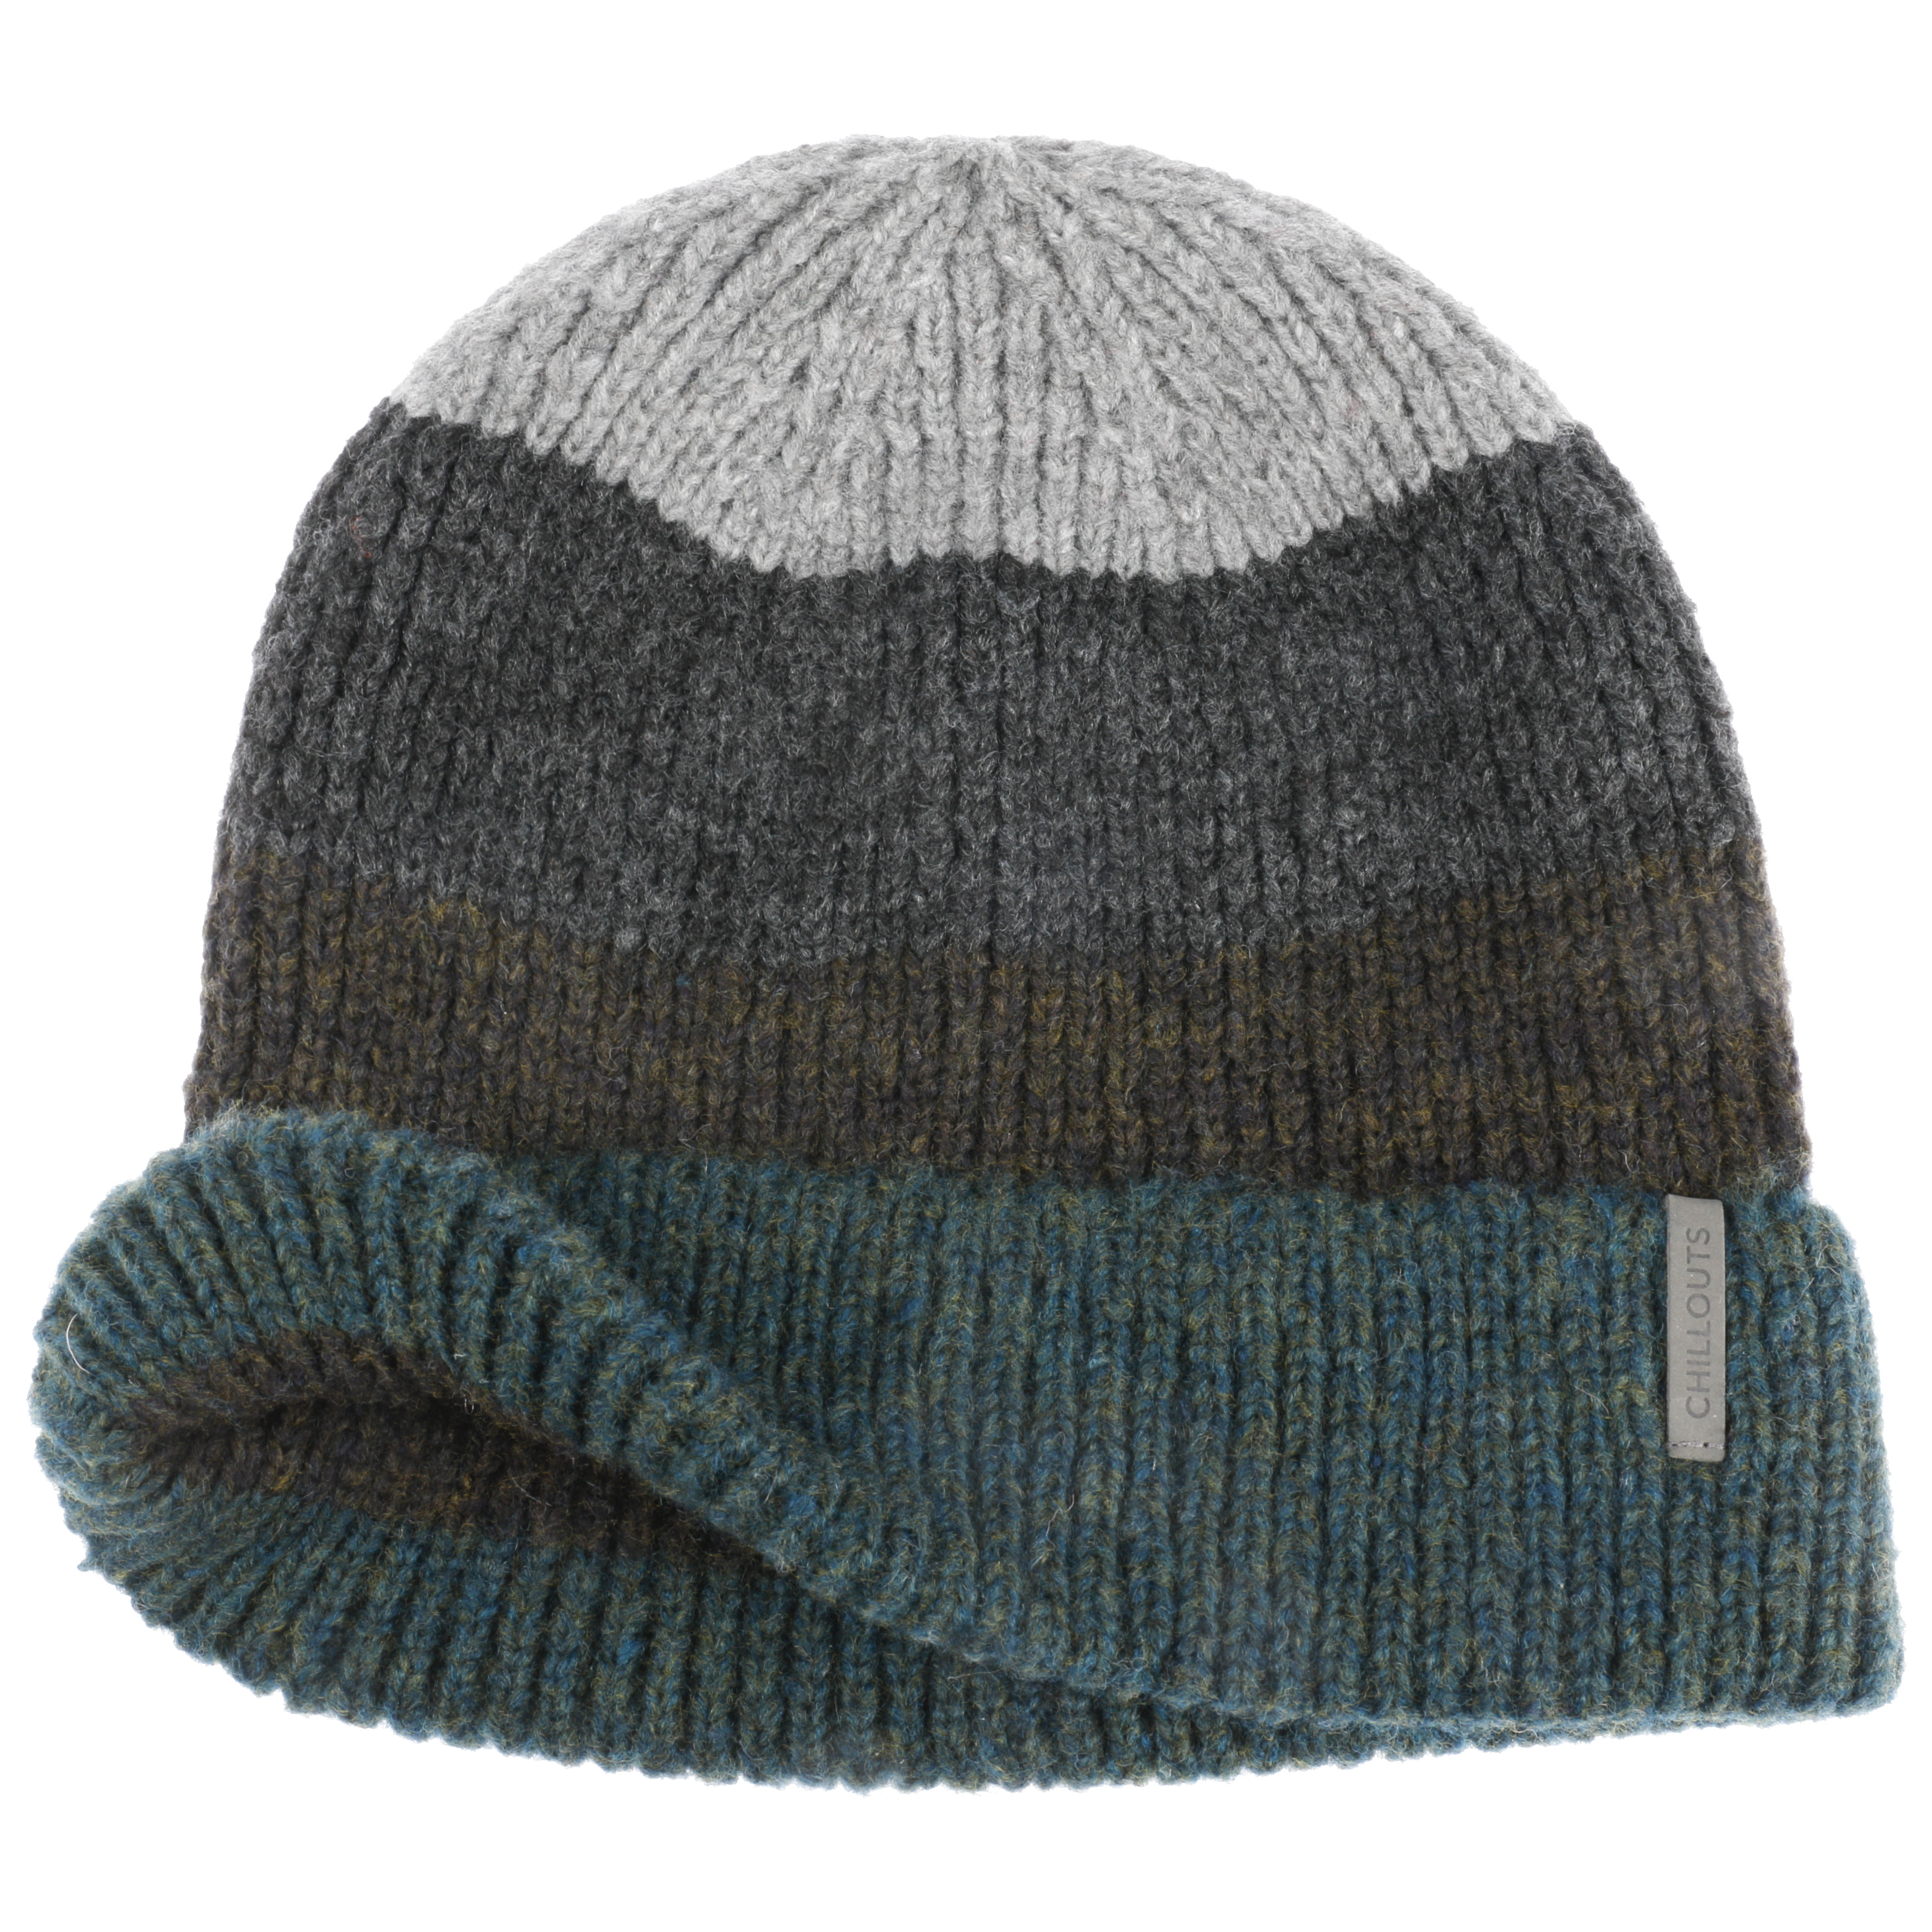 Beanie 24,99 Chillouts by € Fritz -